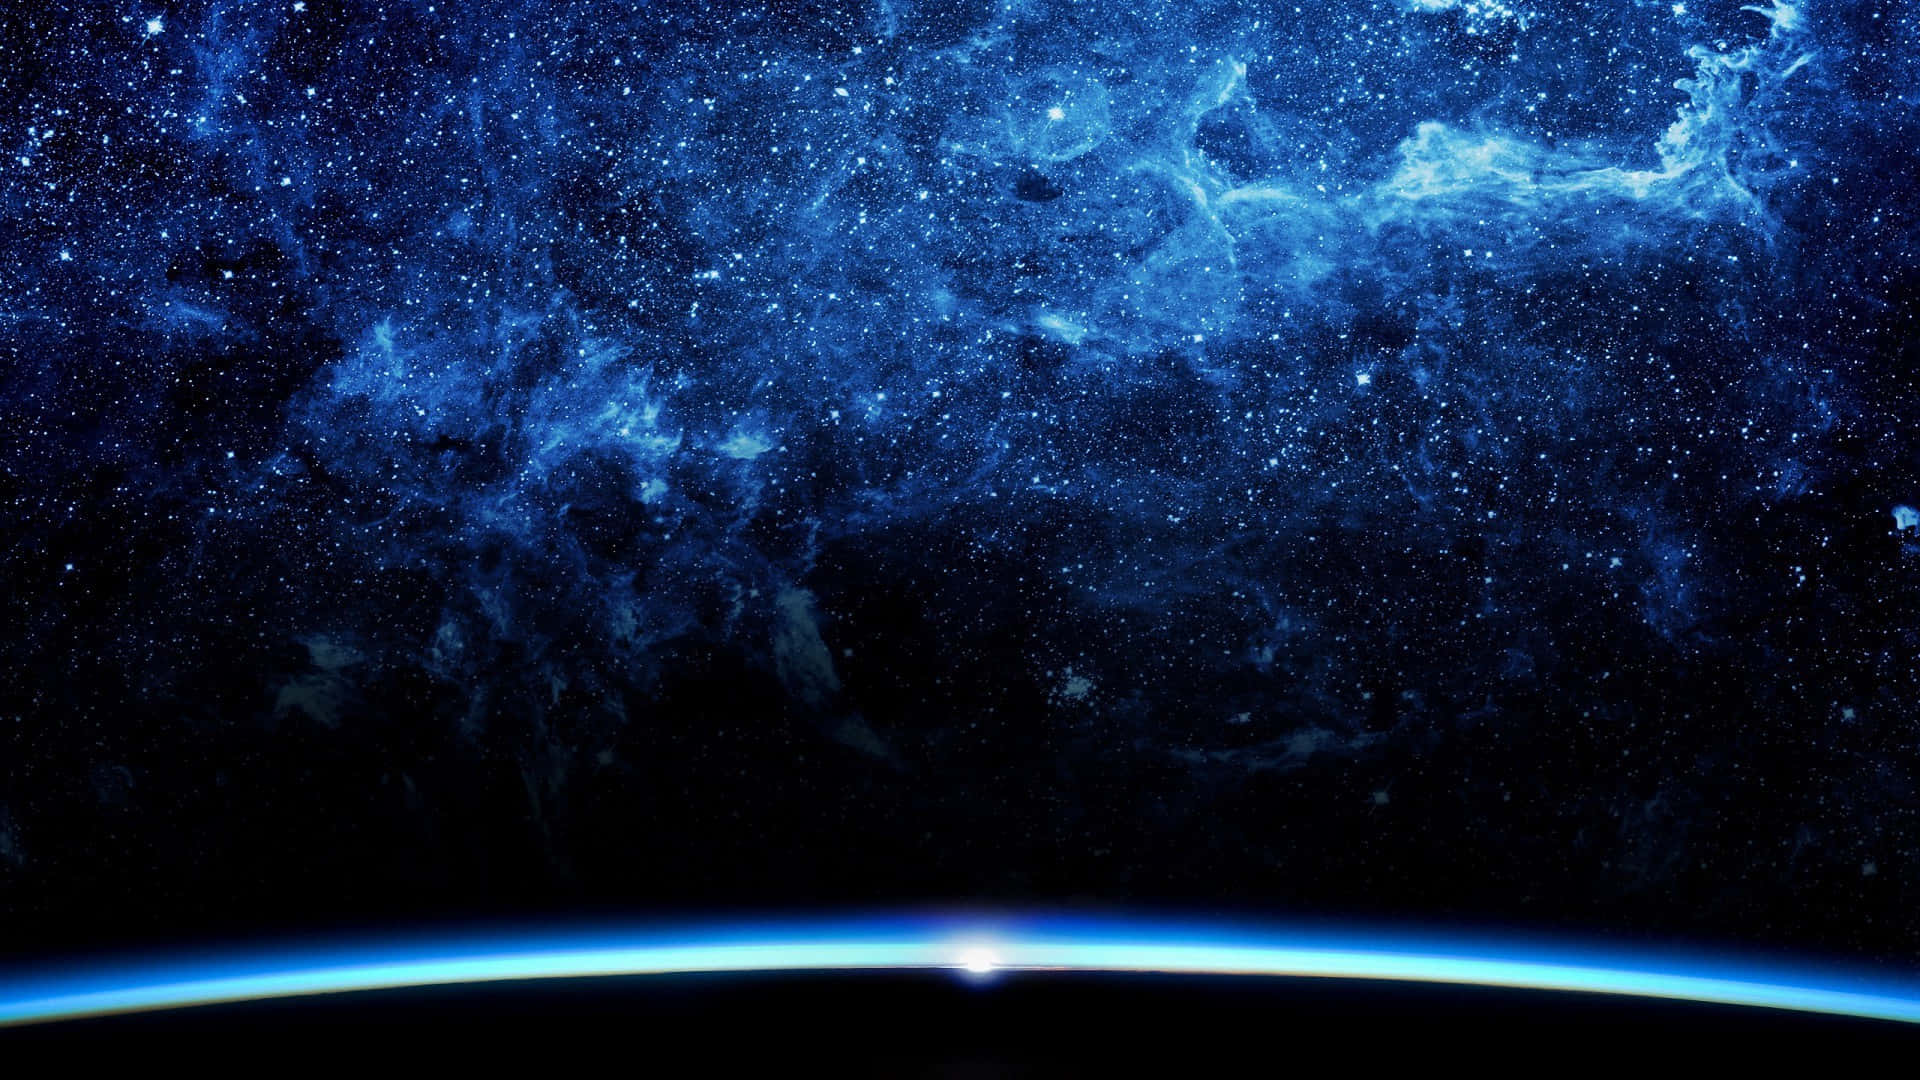 An Image Of The Earth And Space With Blue And White Stars